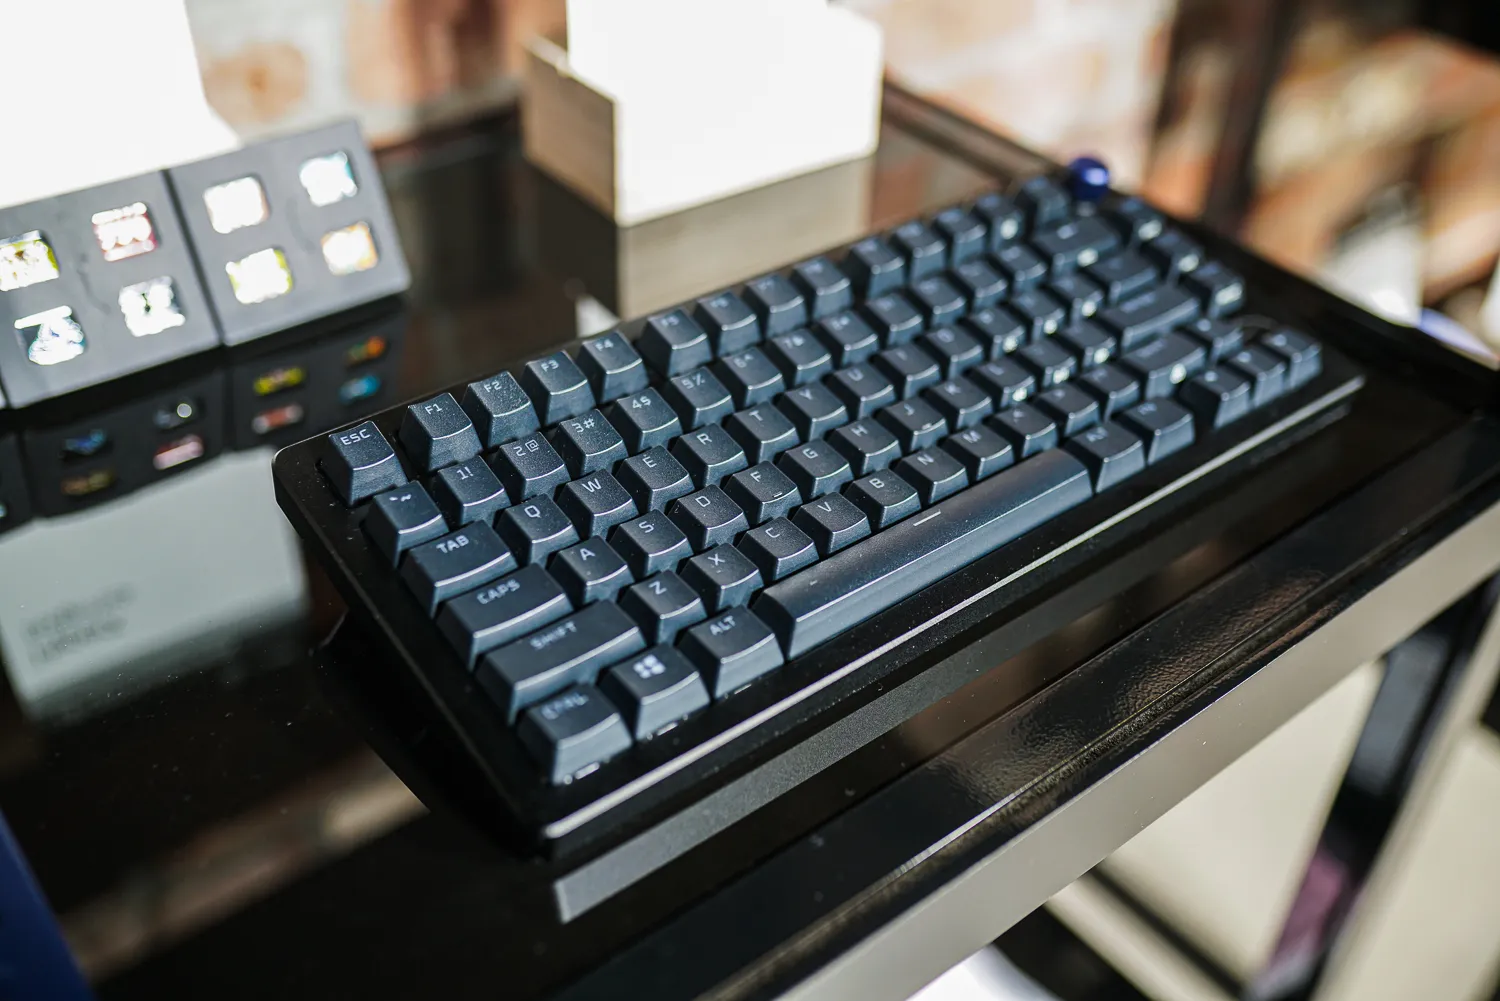 The HyperX Alloy Rise keyboard with a black shell